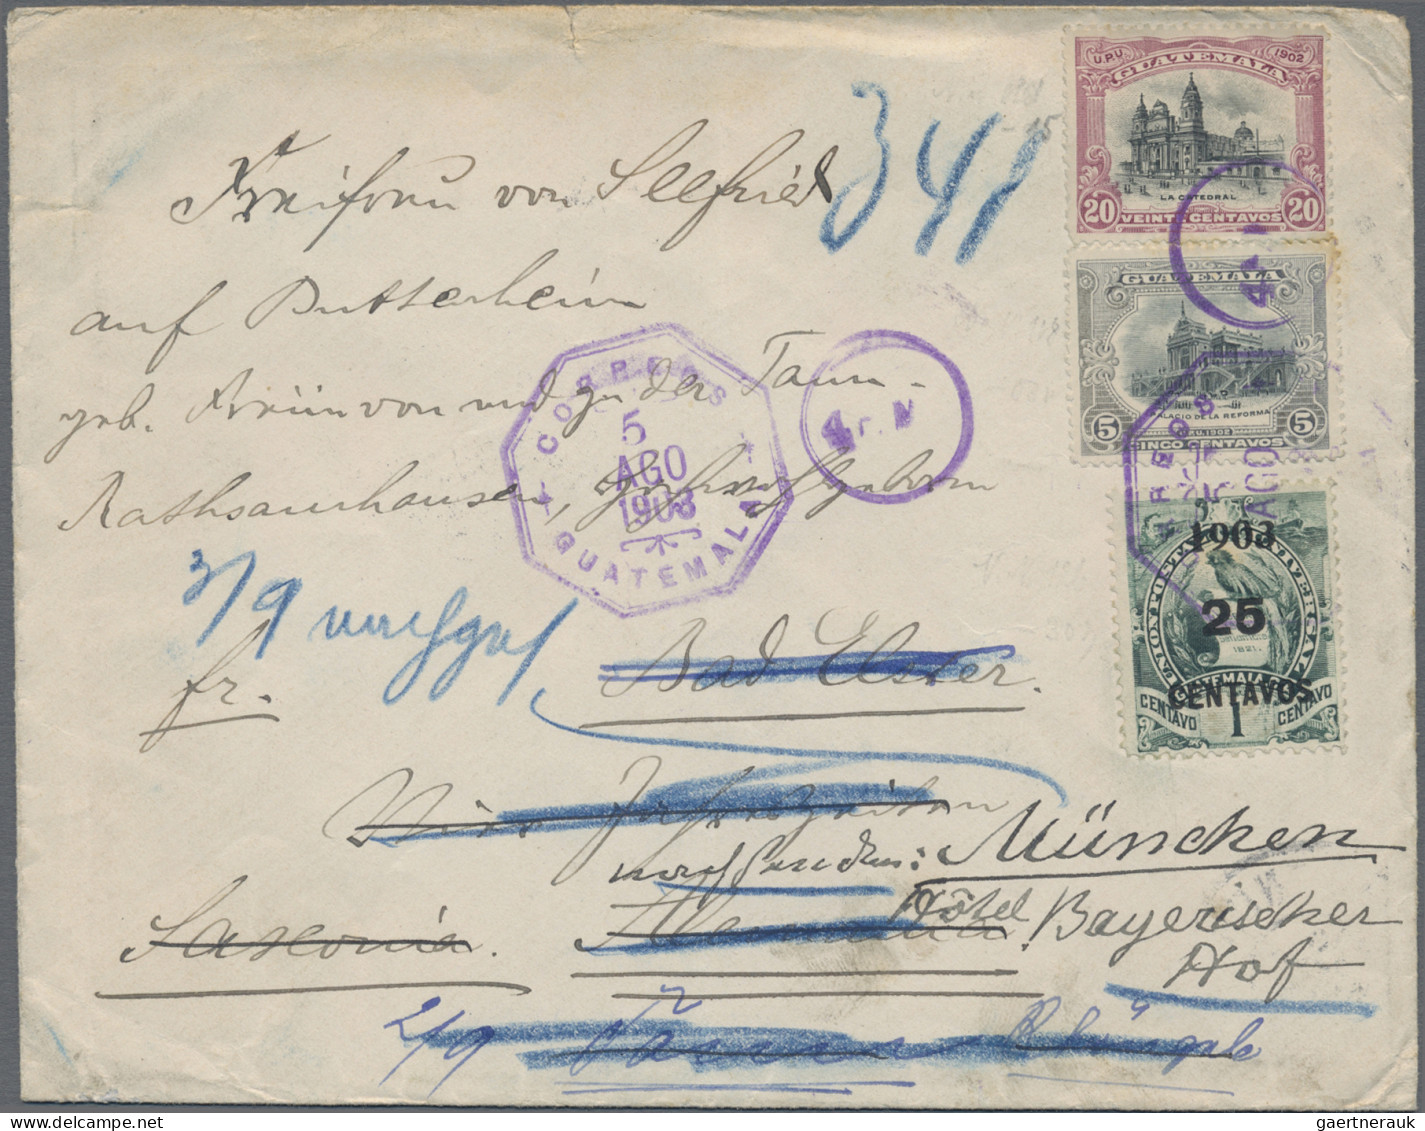 Guatemala: 1890/1960 (ca.), assortment of apprx. 117 covers/cards, thereof apprx